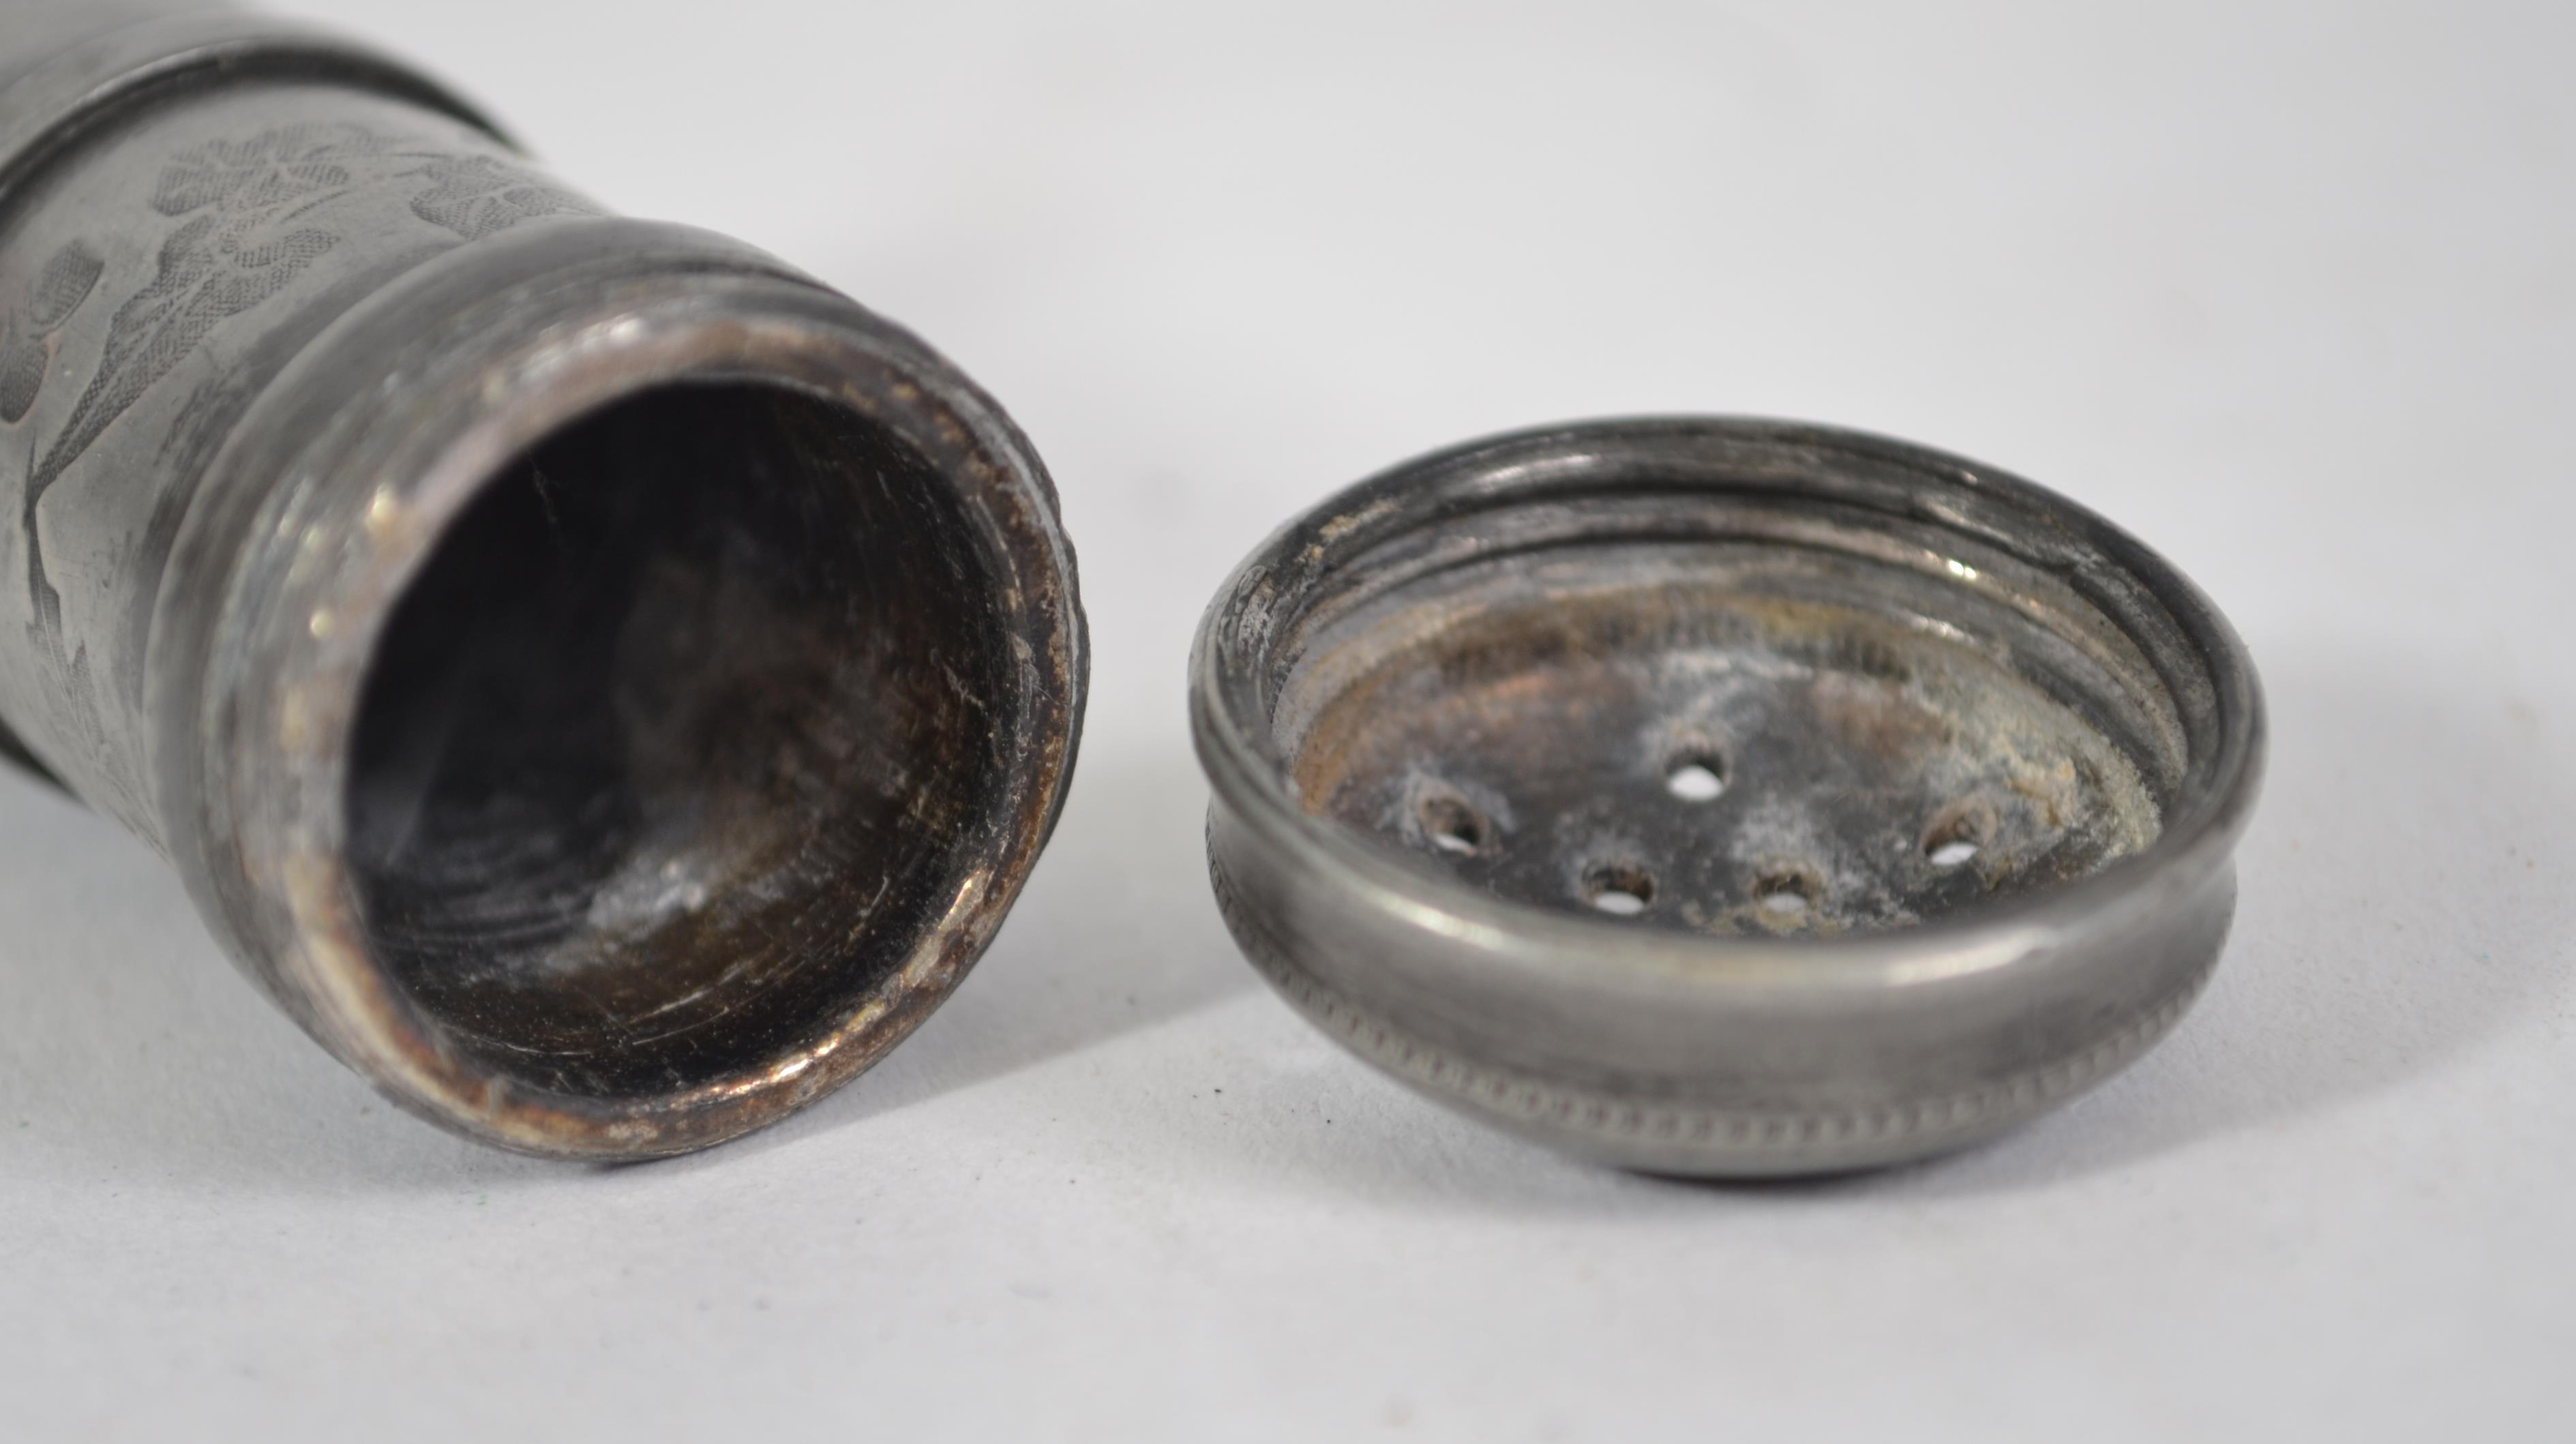 A believed 18th century pewter writing sander of c - Image 5 of 5